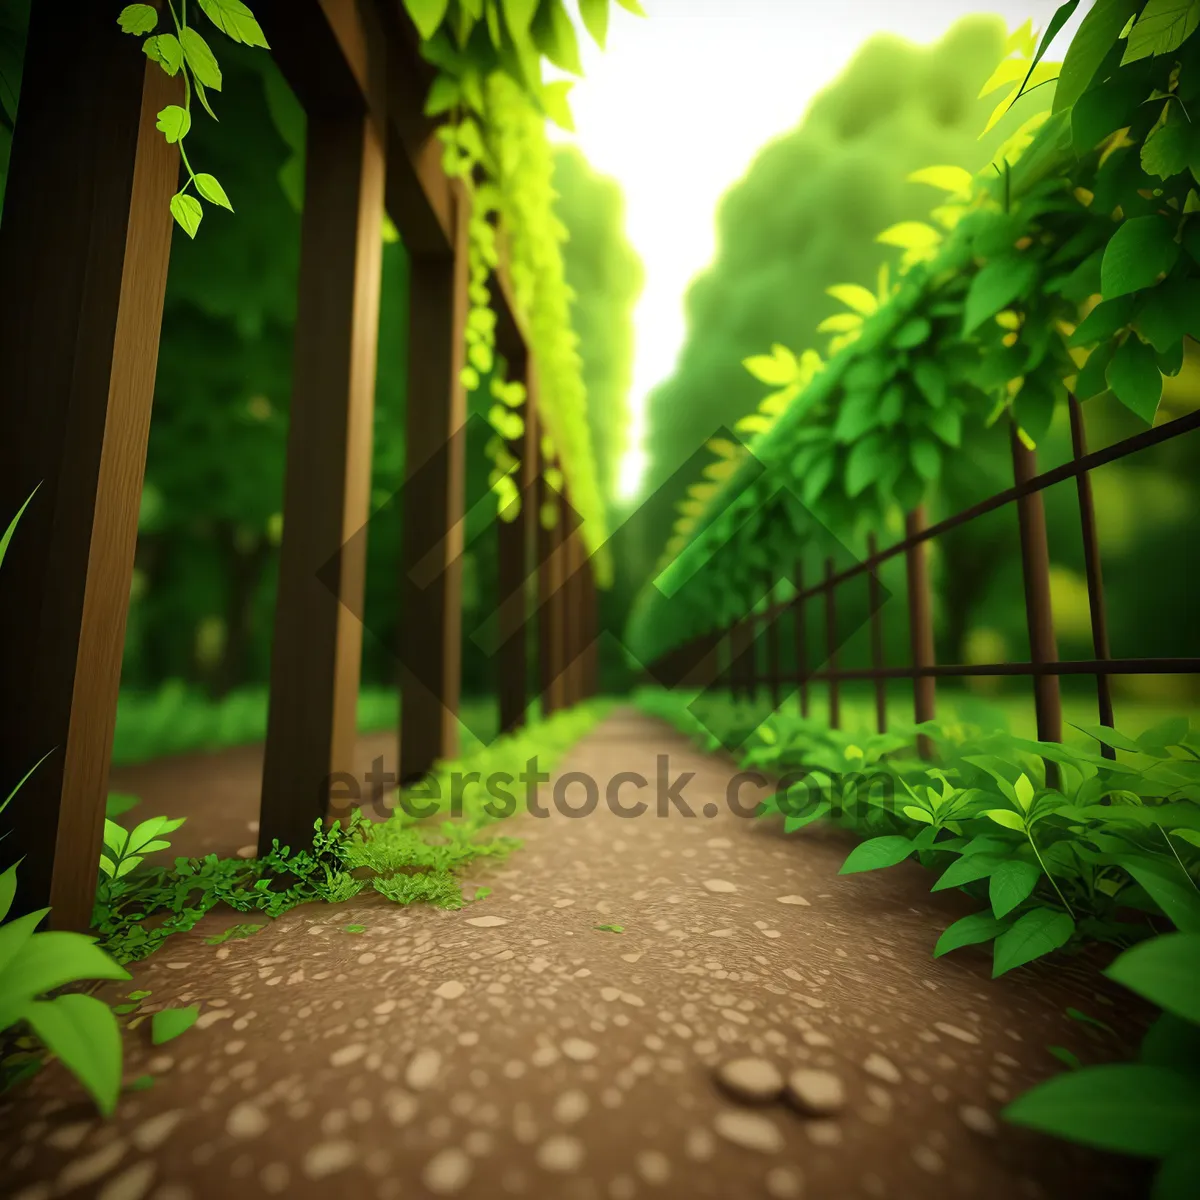 Picture of Sunlit Pathway through Lush Forest